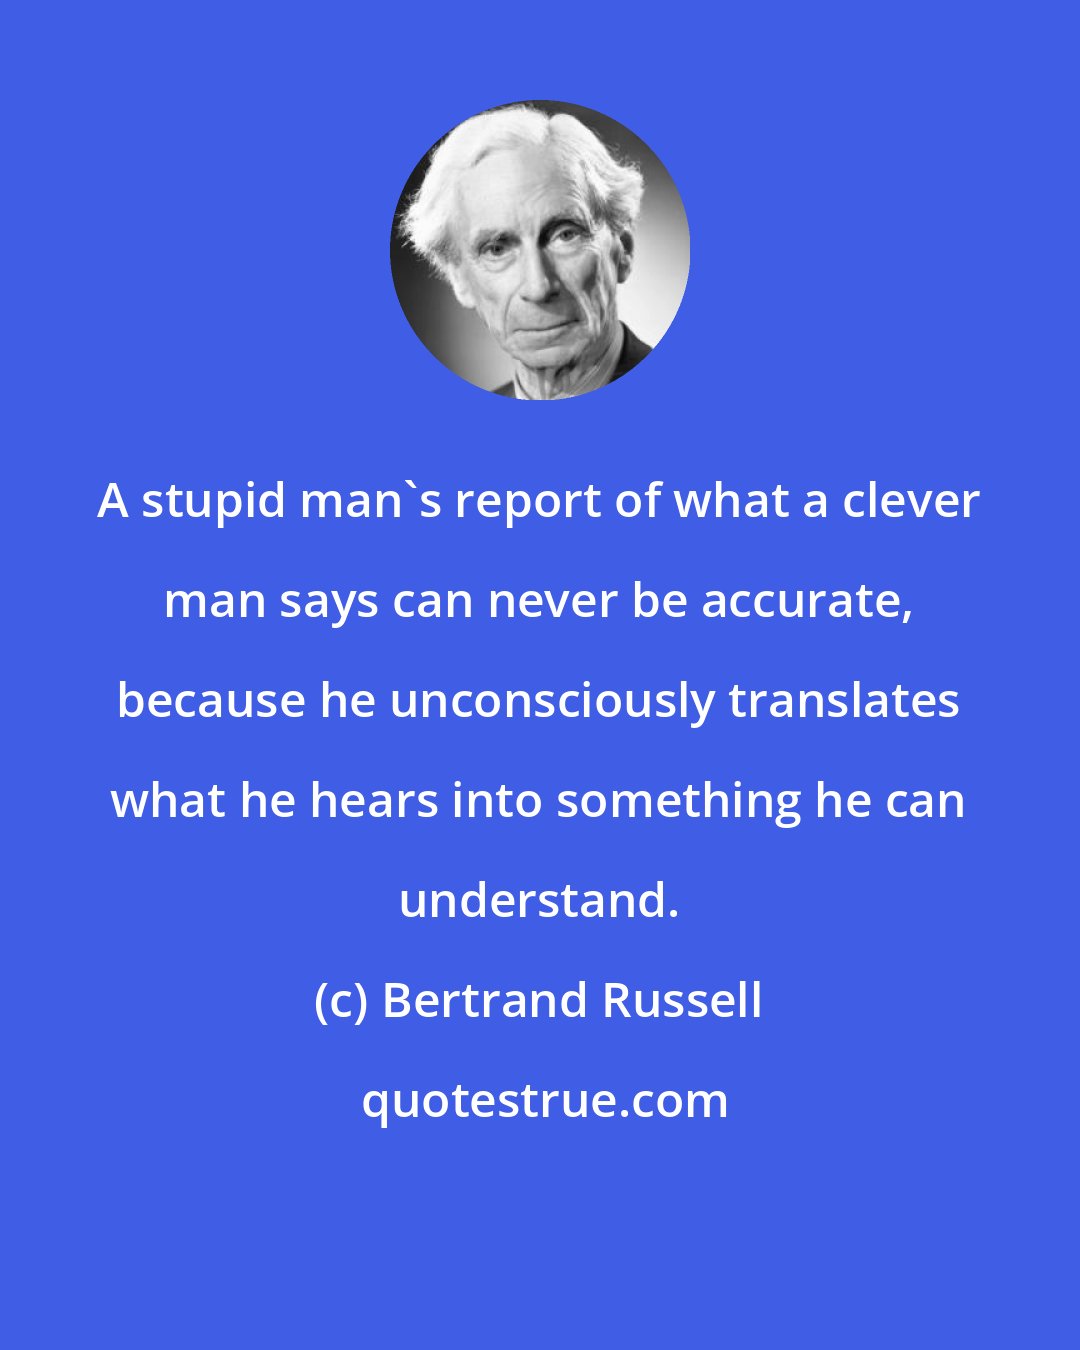 Bertrand Russell: A stupid man's report of what a clever man says can never be accurate, because he unconsciously translates what he hears into something he can understand.